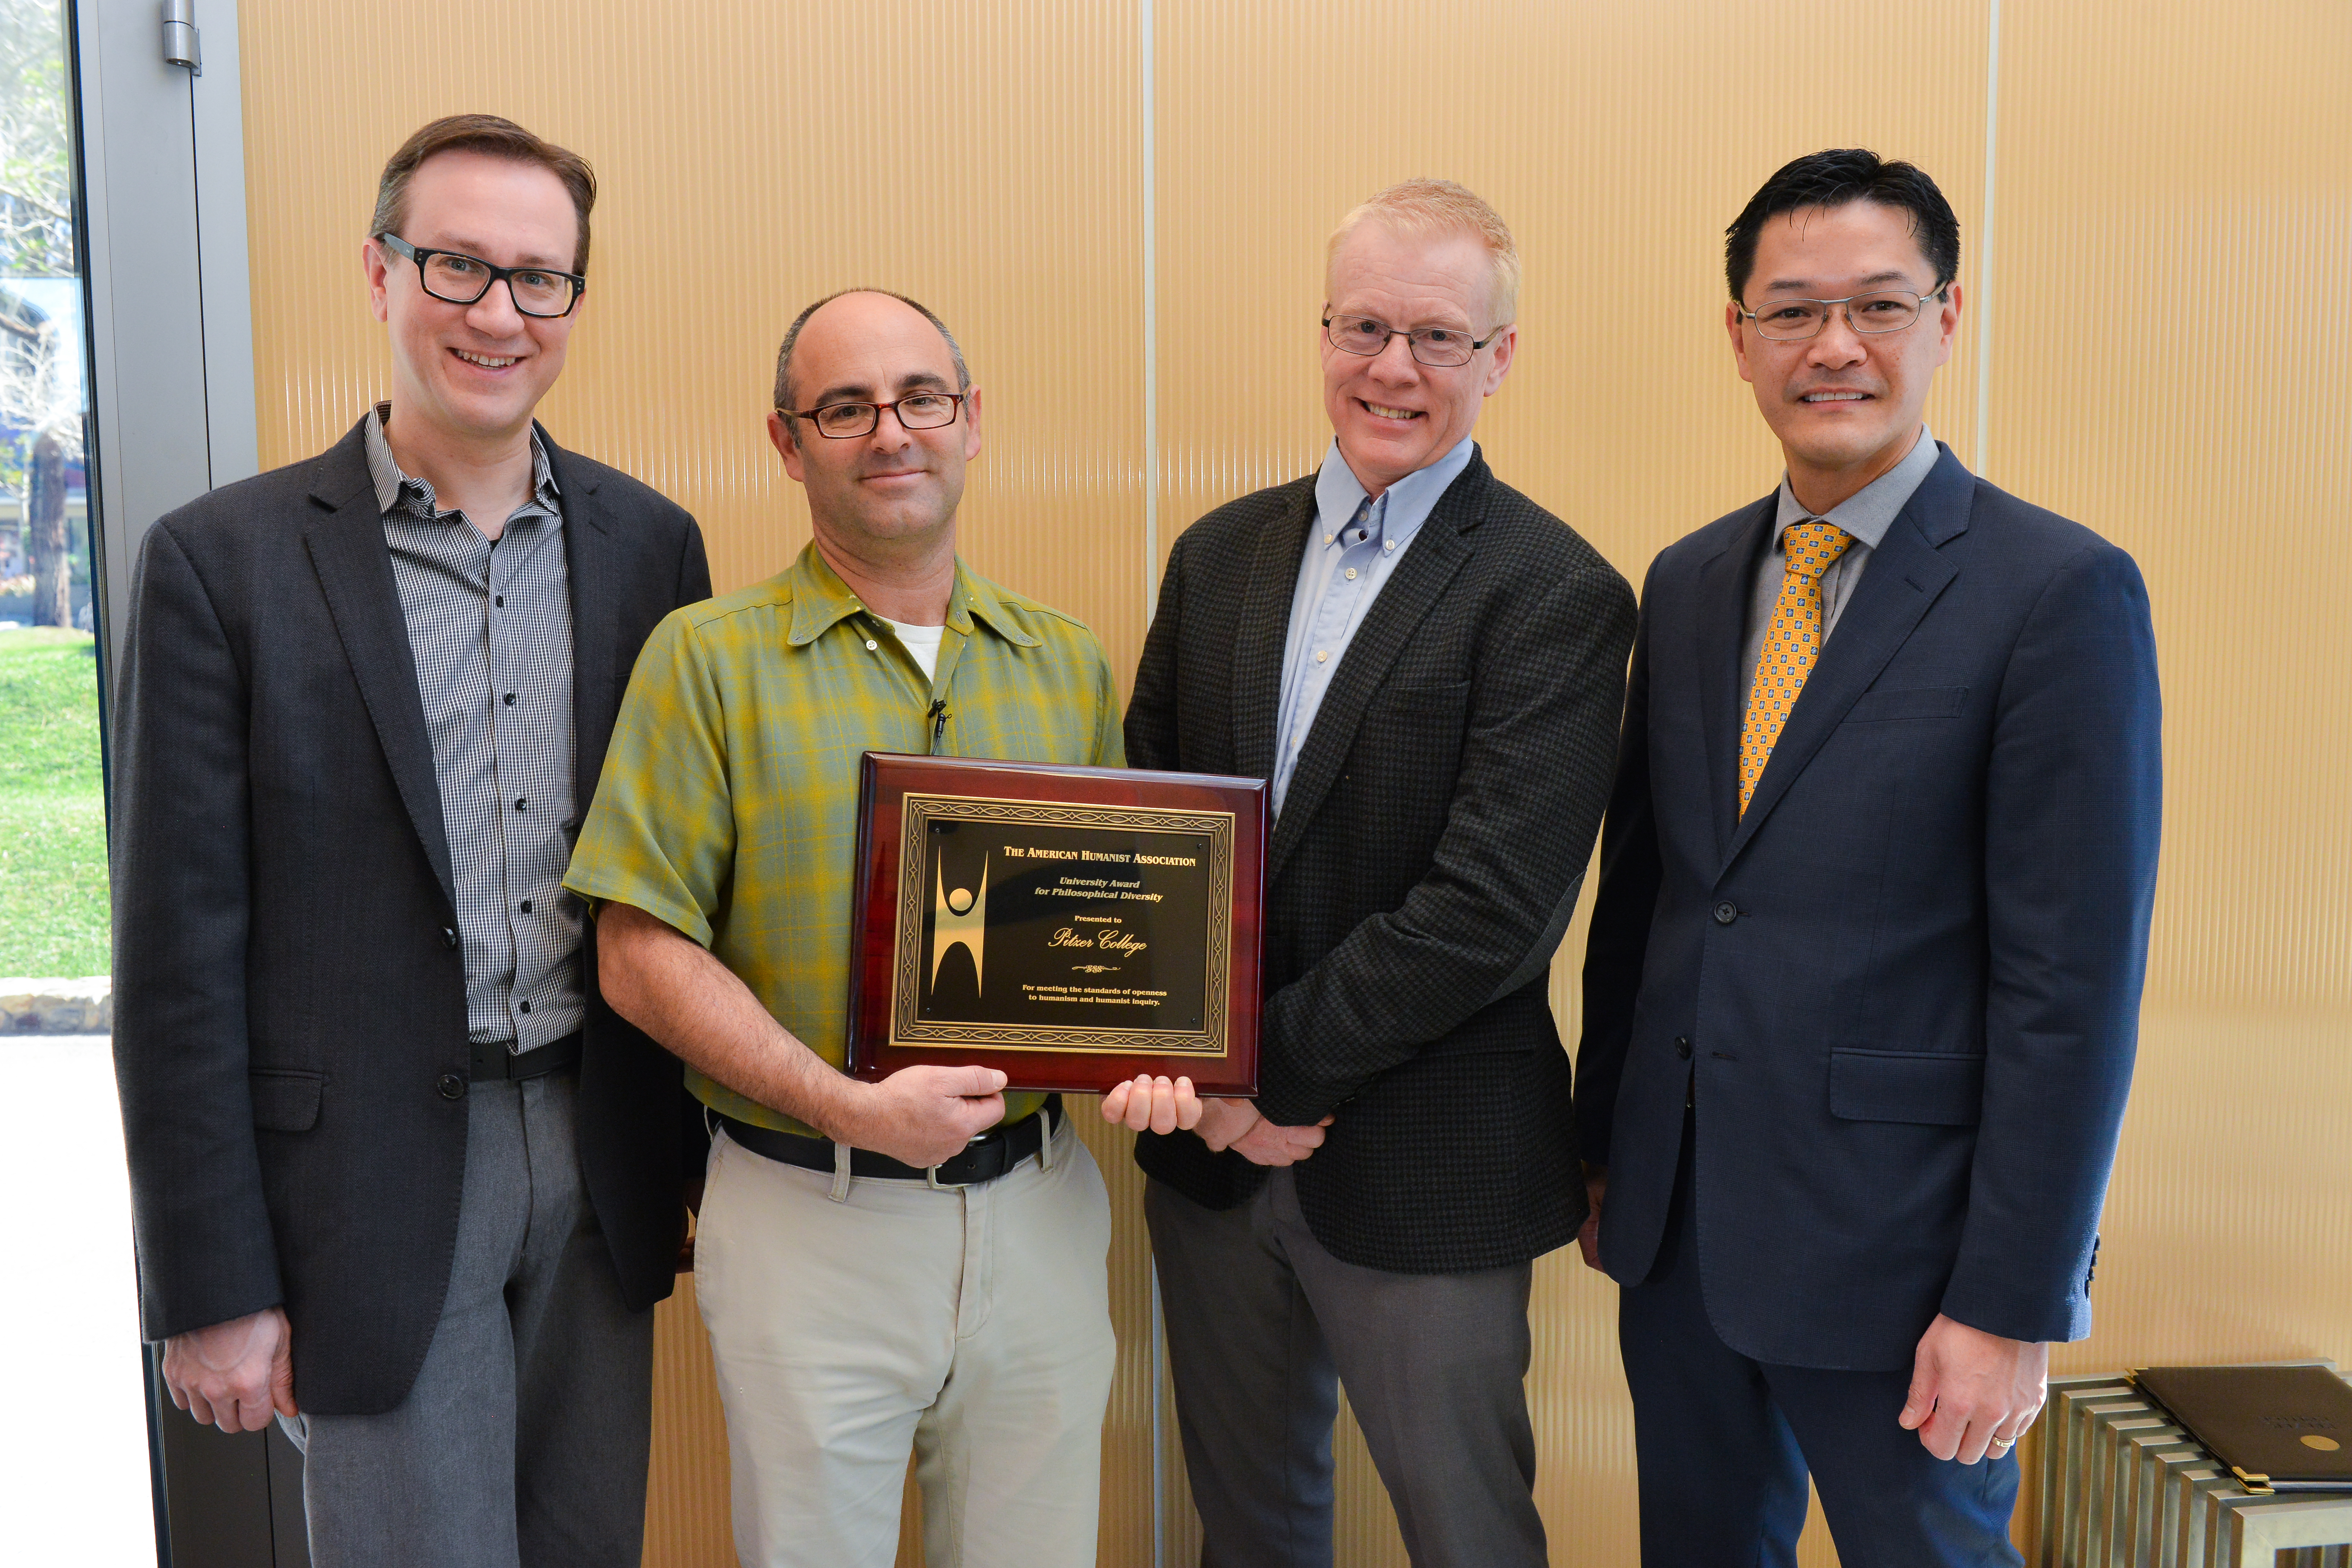 Pitzer college officials, including Dr. Phil Zuckerman, accepting an award from the American Humanist Association, with Executive Director Roy Speckhardt.